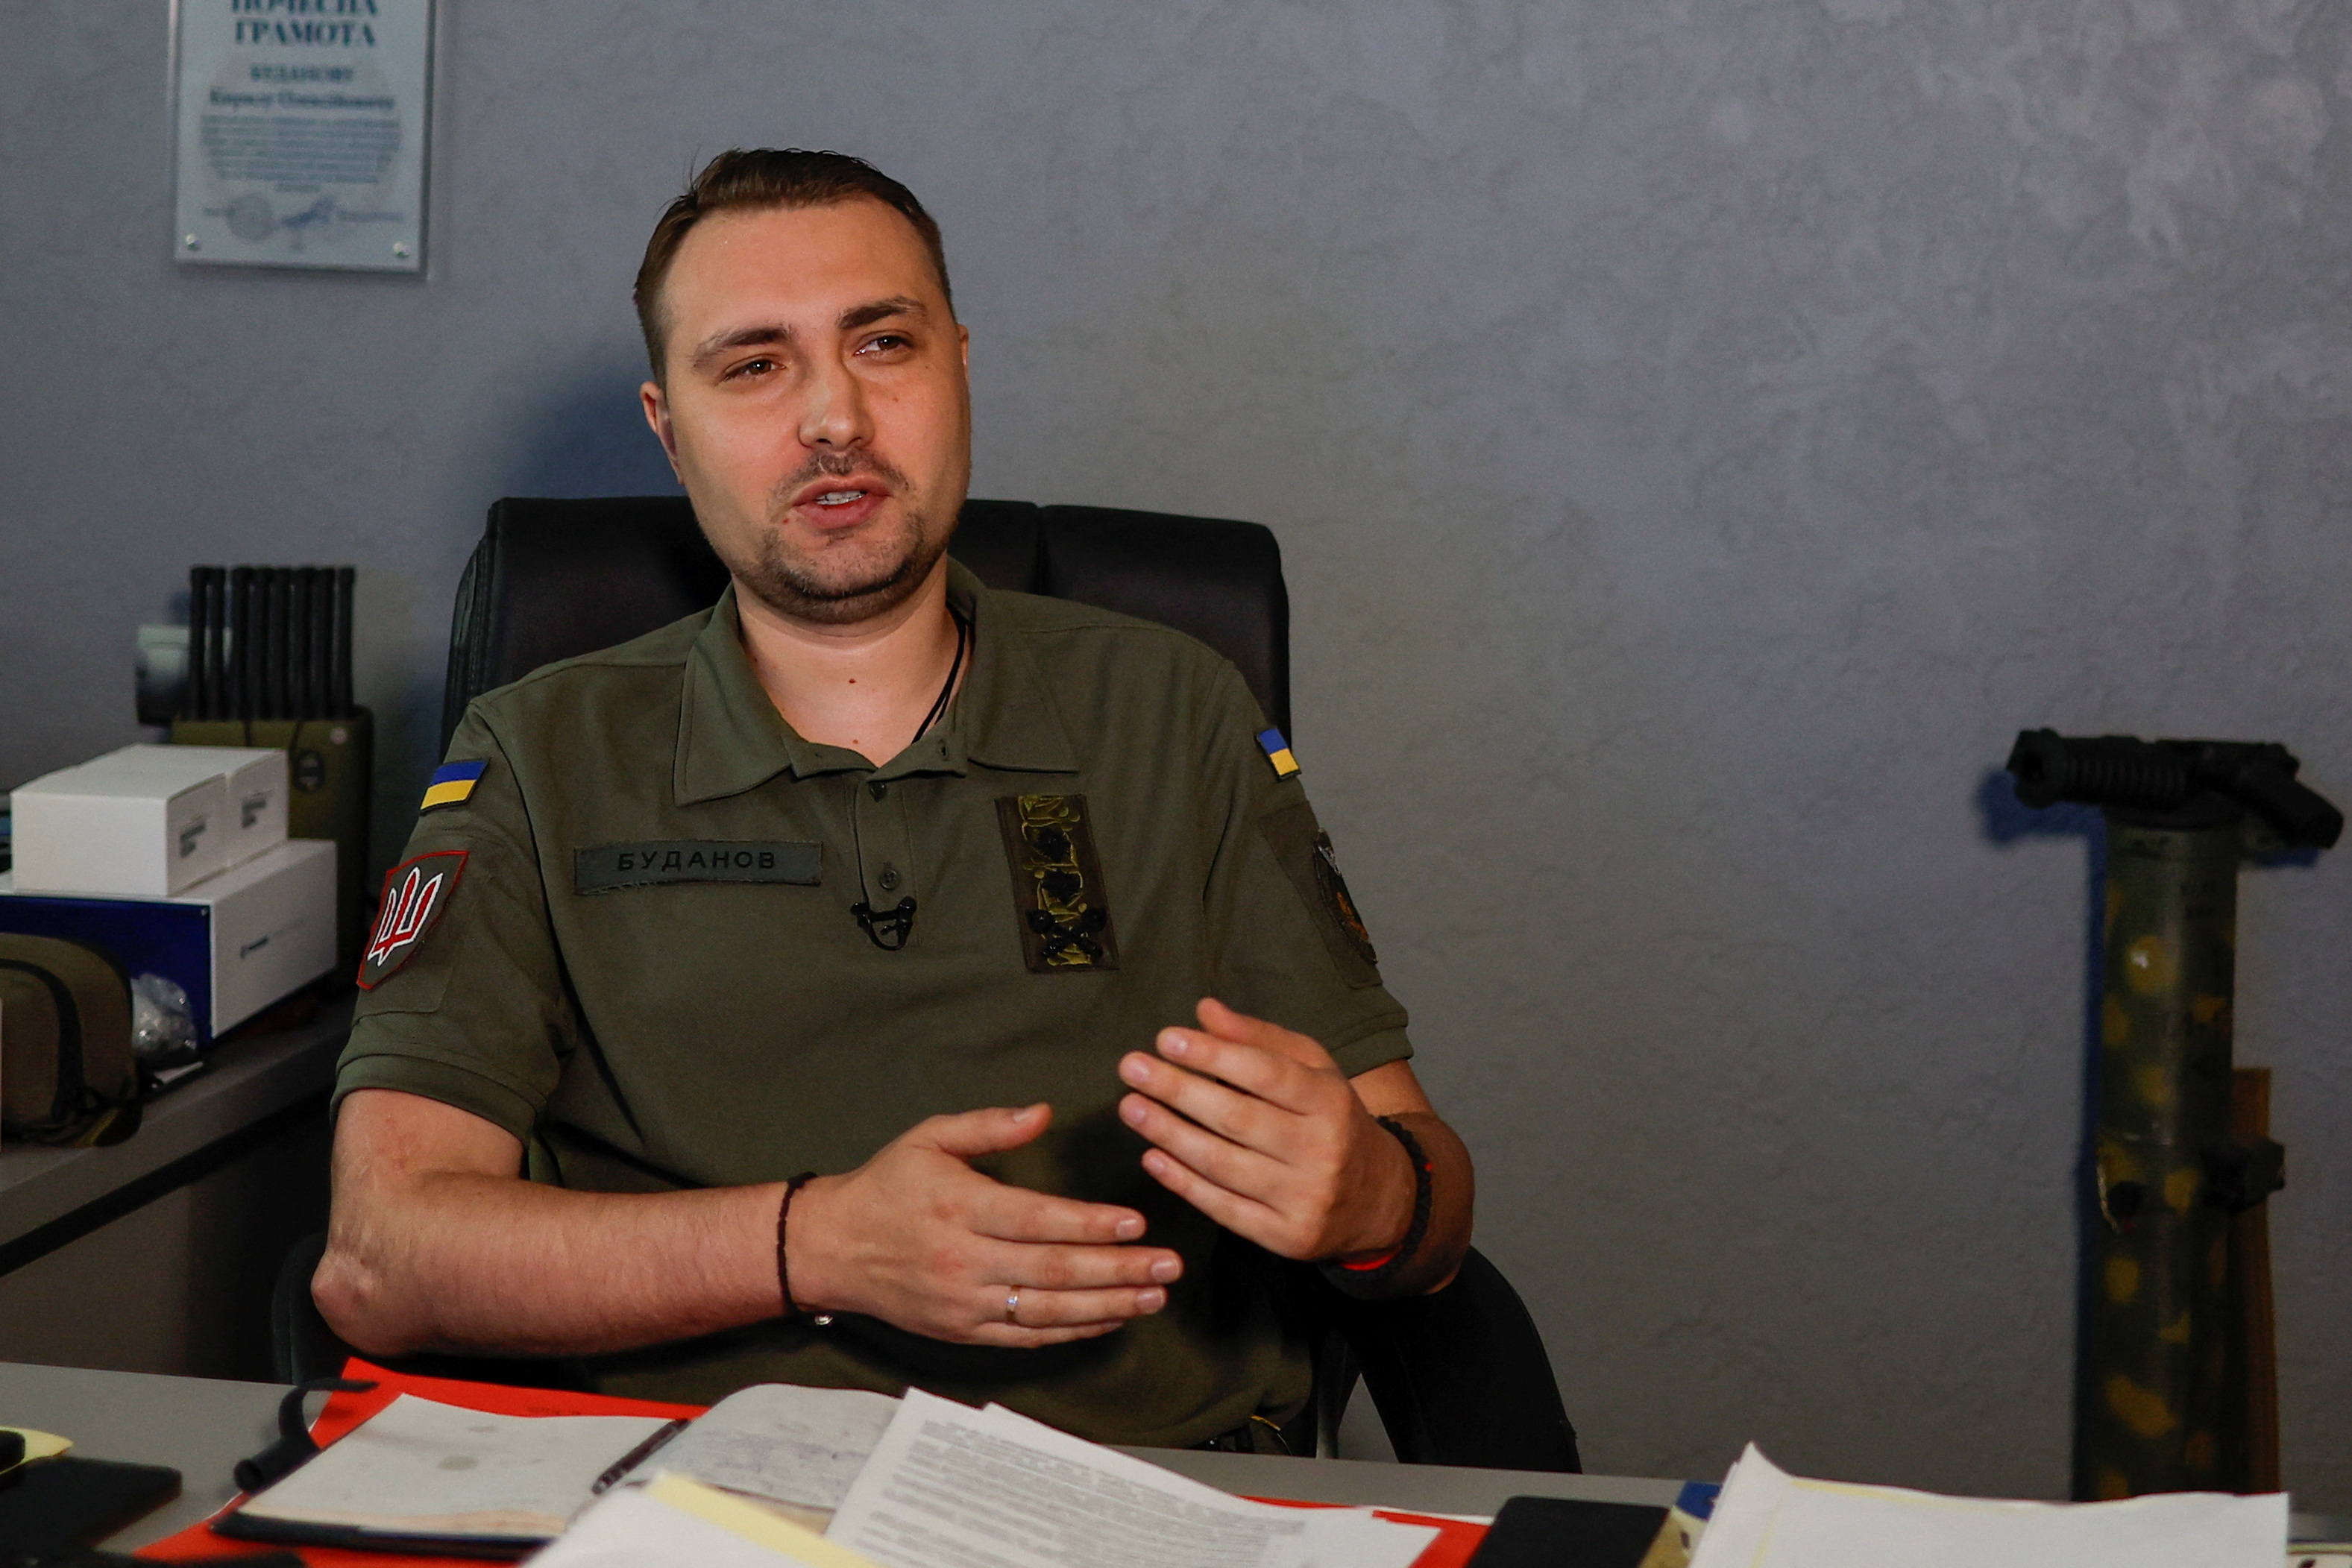 Ukraine's Military Intelligence chief Budanov speaks during an interview with Reuters in Kyiv